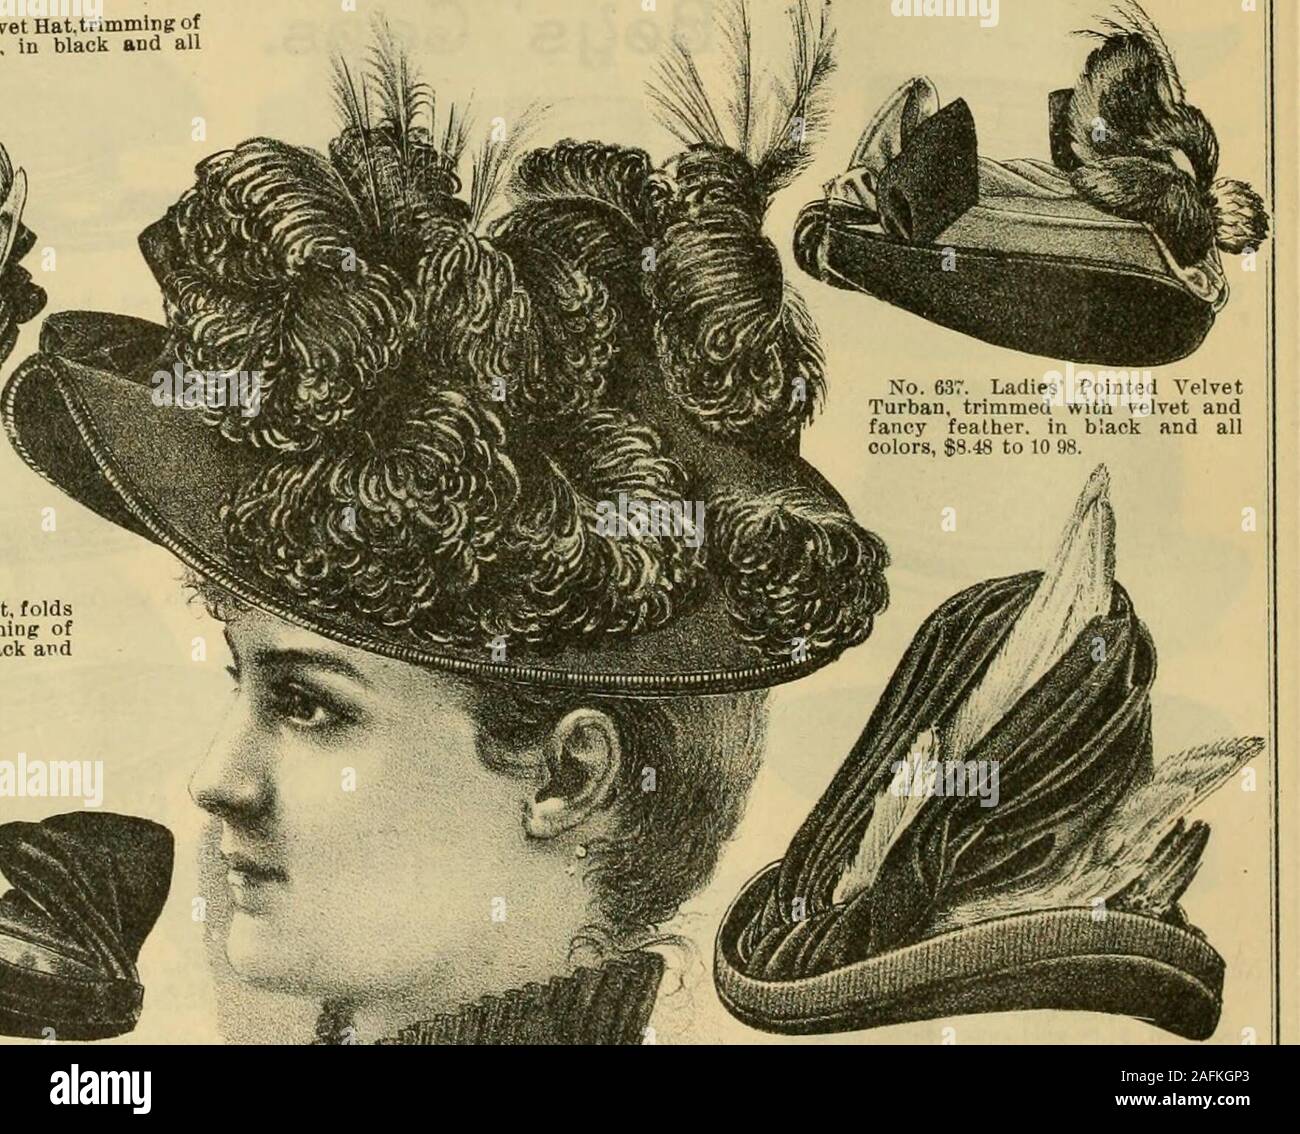 . Fall and Winter, 1890-91 Fashion Catalogue / H. O'Neill and Co.. No. 639. LadiesVelvet Toque, siift front and :iBl3H^^^H^^^^HP No. 643. LadiesPelt Walking Hat.plaln velvet back trimming of velvet and fancy wing, in black ; J^HS^H^^^I^^^HK^ 1?°,* ^^ stylish trimming of velvet and wings, and all colors, $8.98 to 12.48. J^BWBB^^^lBHiBi^Bk^ black and all colors, $4.98 to 7.48. No. 641 LadiesLarge Felt Hat. plain facing of velvettrimmed.with nine tips and aigrette, with folds of velveton opposite side, black and leading colors, $10.98 to 16 00. Stock Photo